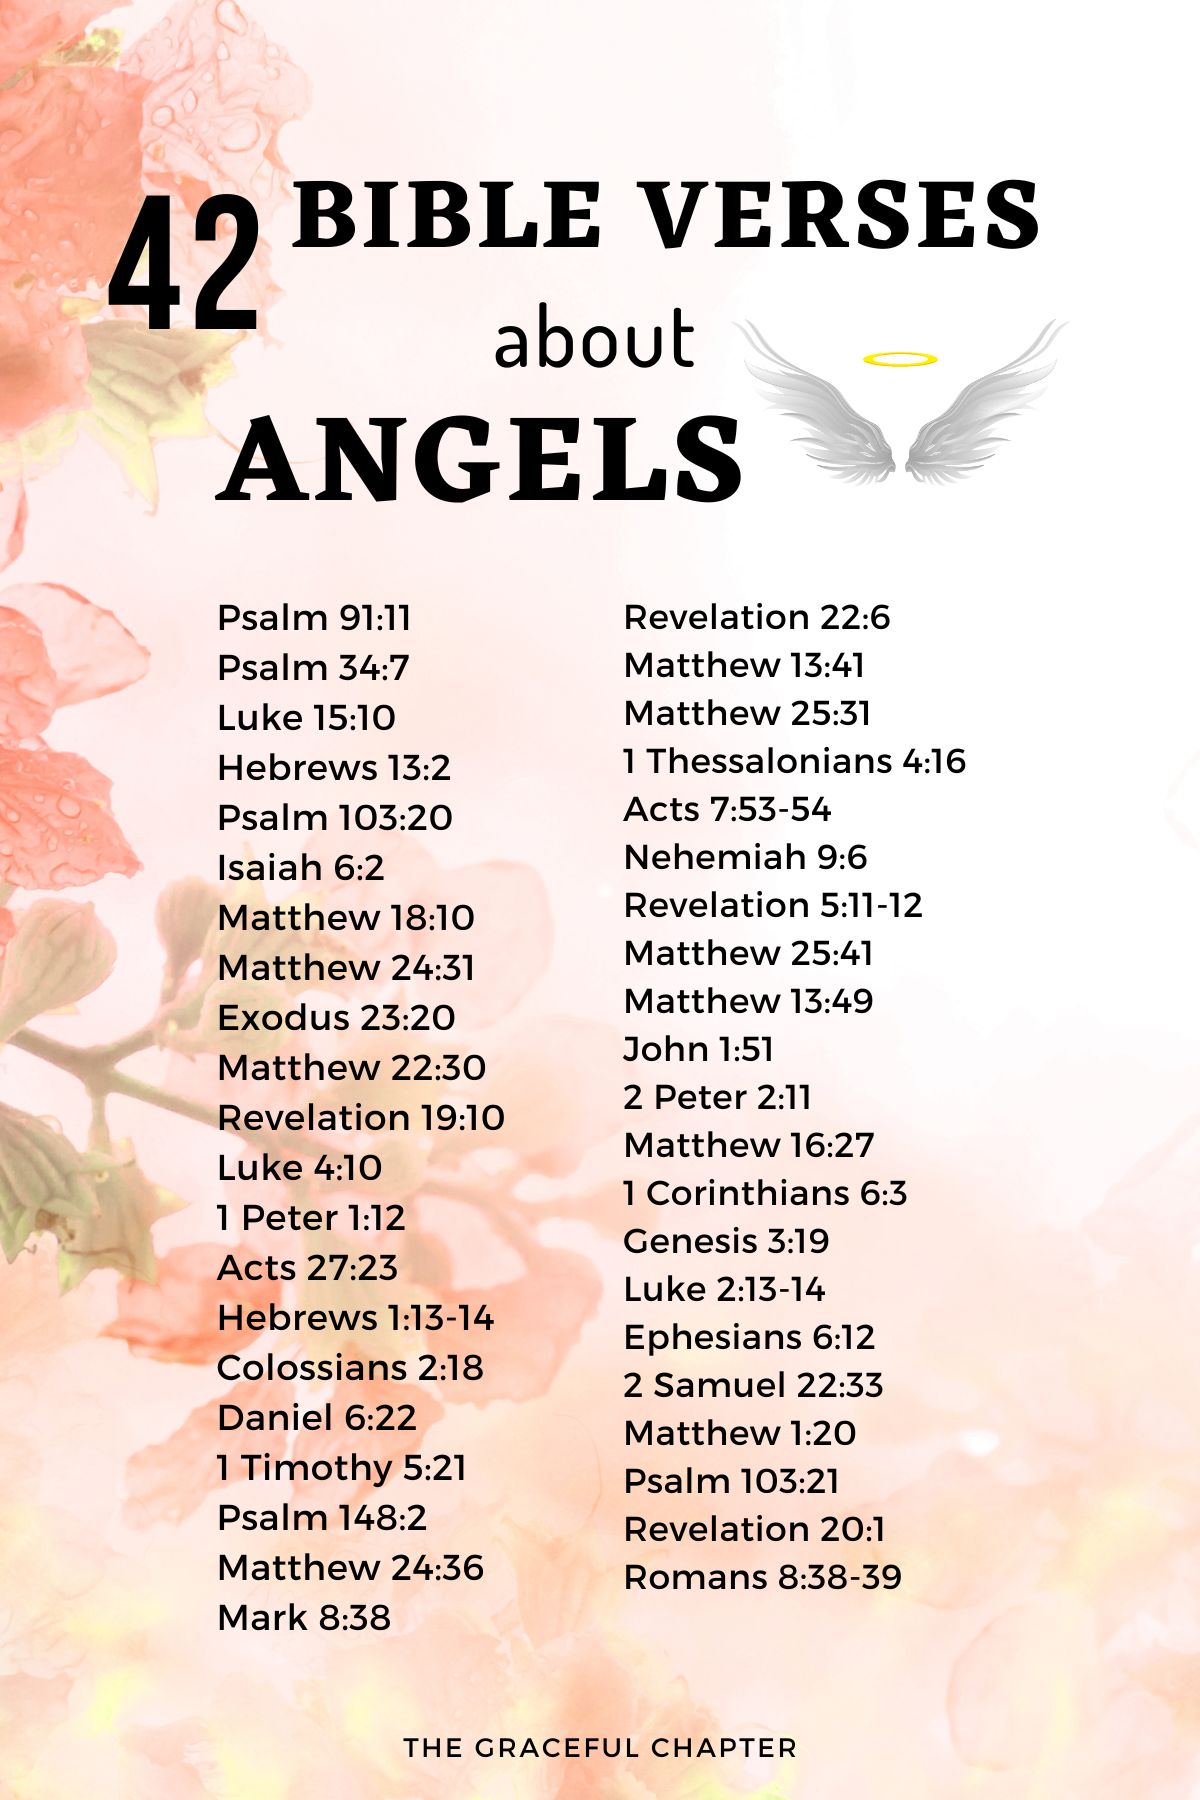 42 bible verses about angels